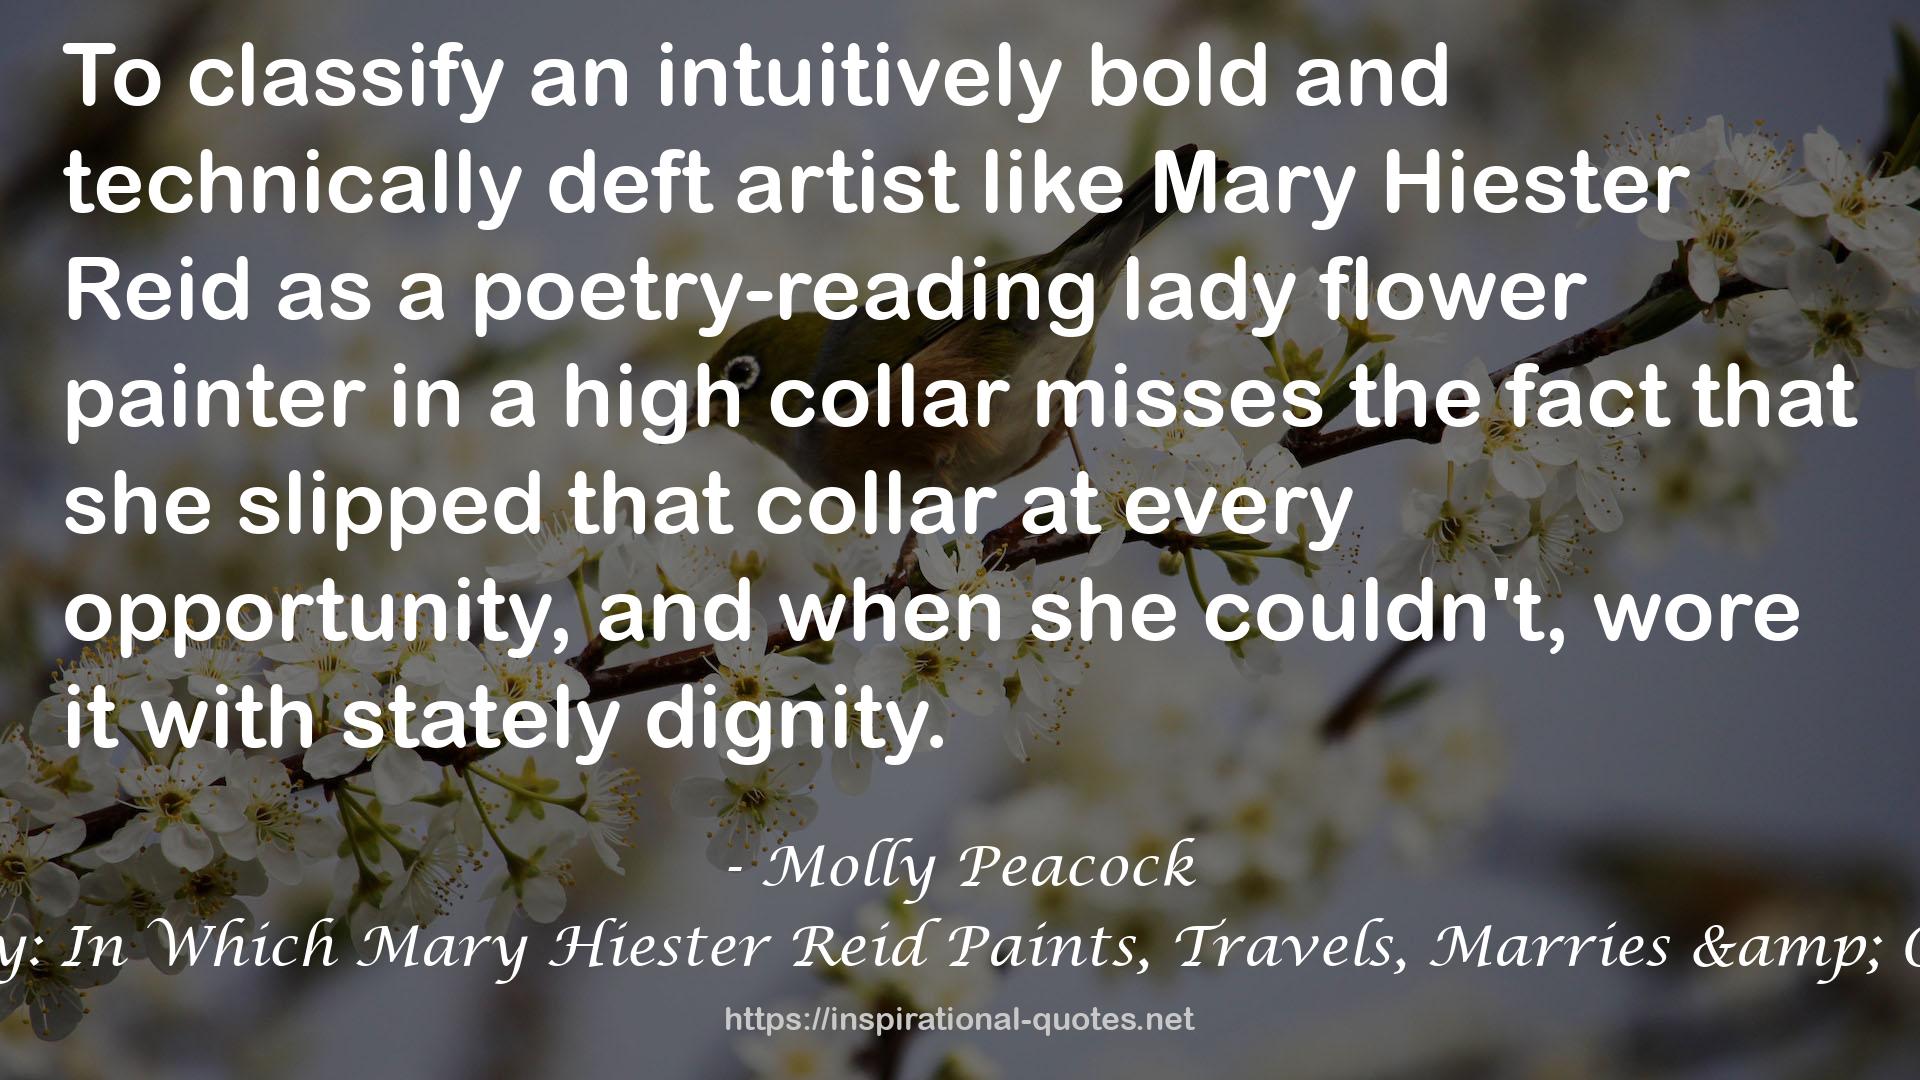 Flower Diary: In Which Mary Hiester Reid Paints, Travels, Marries & Opens a Door QUOTES